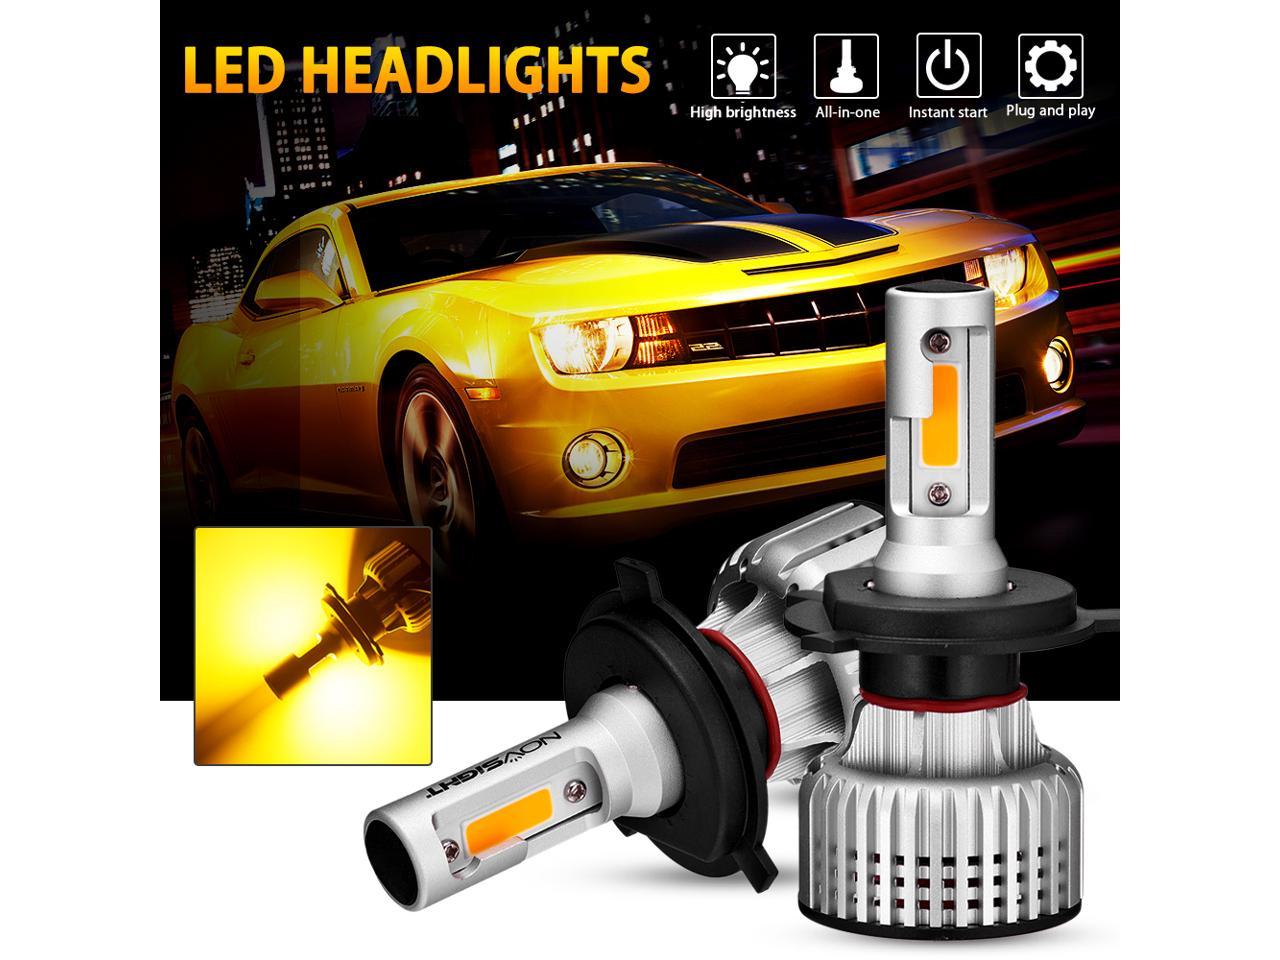 Adjustable LED Conversion Kit with Fan 400% Brighter LED Low Beam/Fog Lights 6500K Cool White HONCS 9006/HB4 LED Headlight Bulbs Pack of 2 